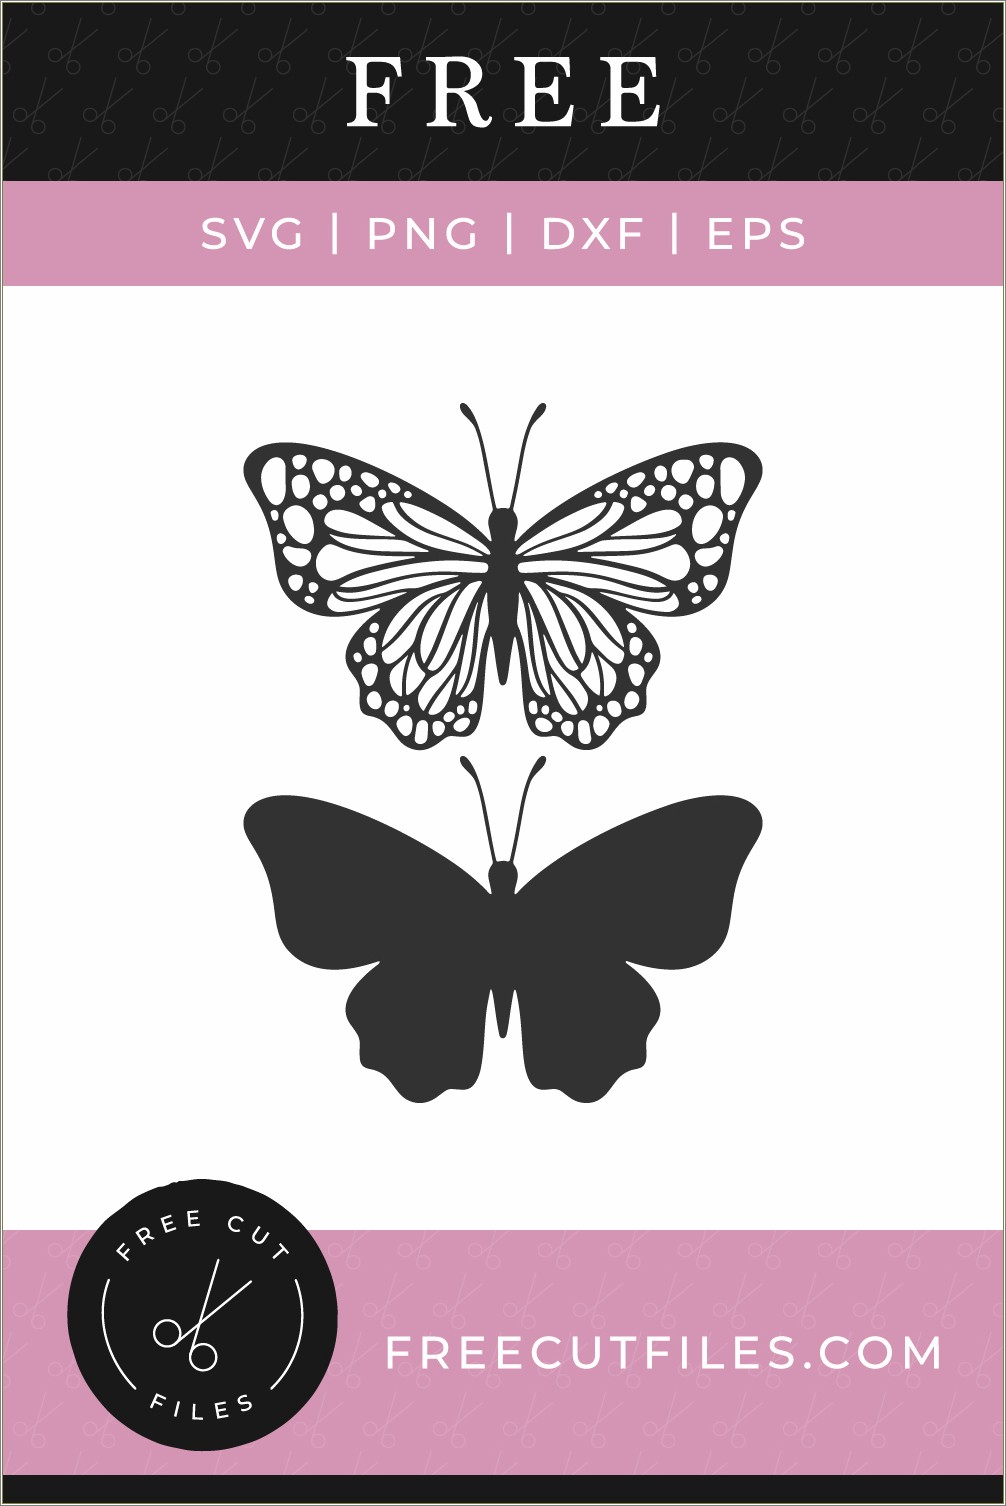 Free Butterfly Templates For Cricut Explore Air 2